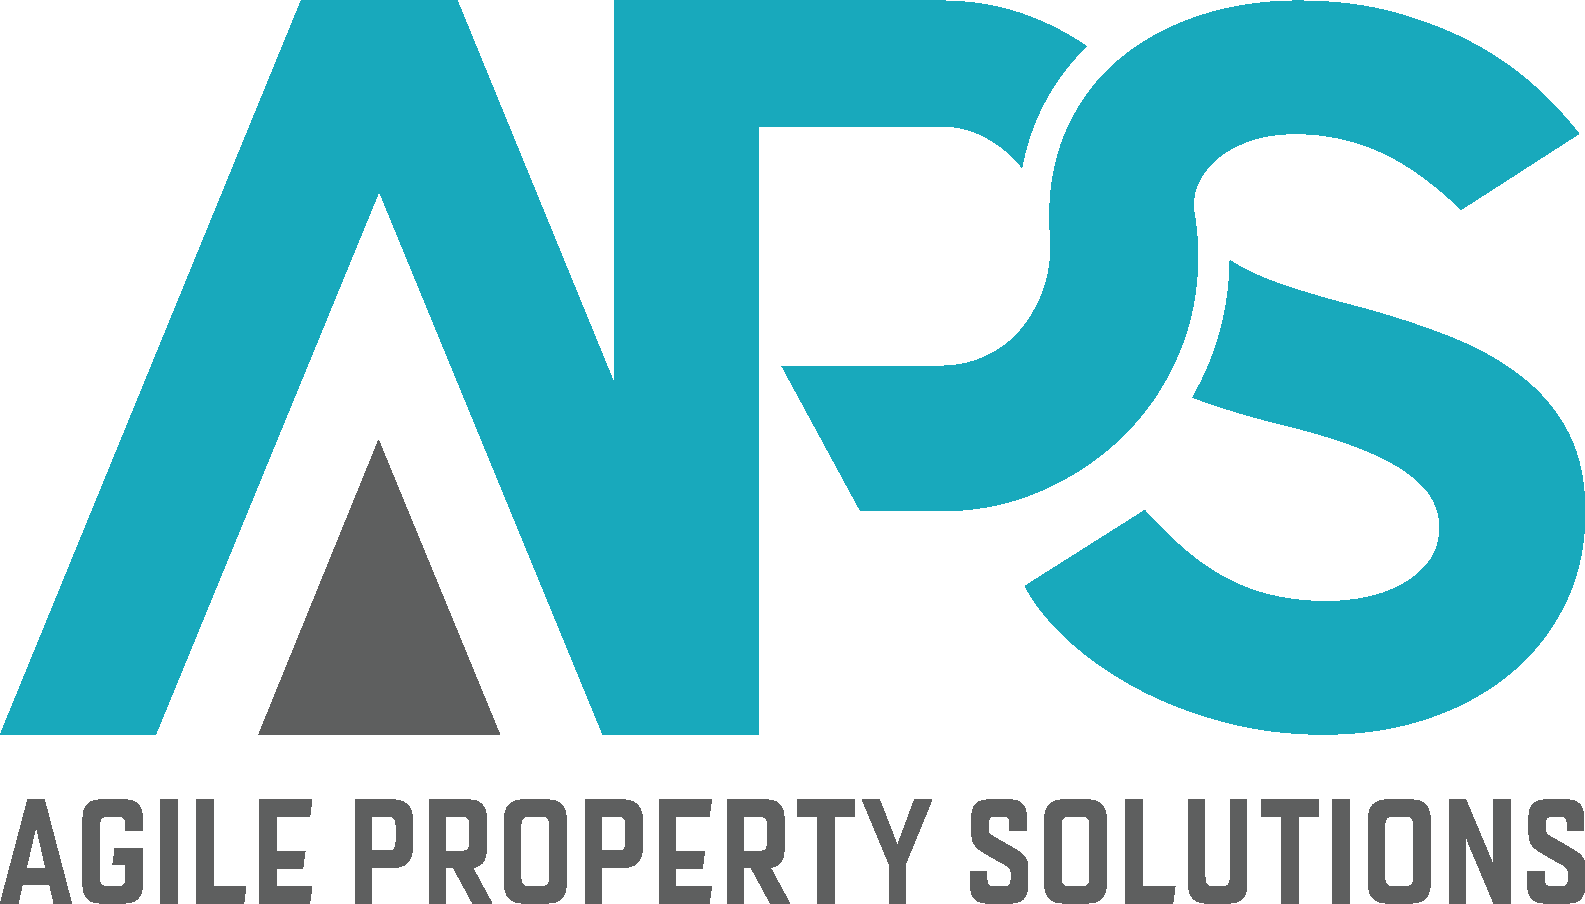 Agile Property Solutions logo